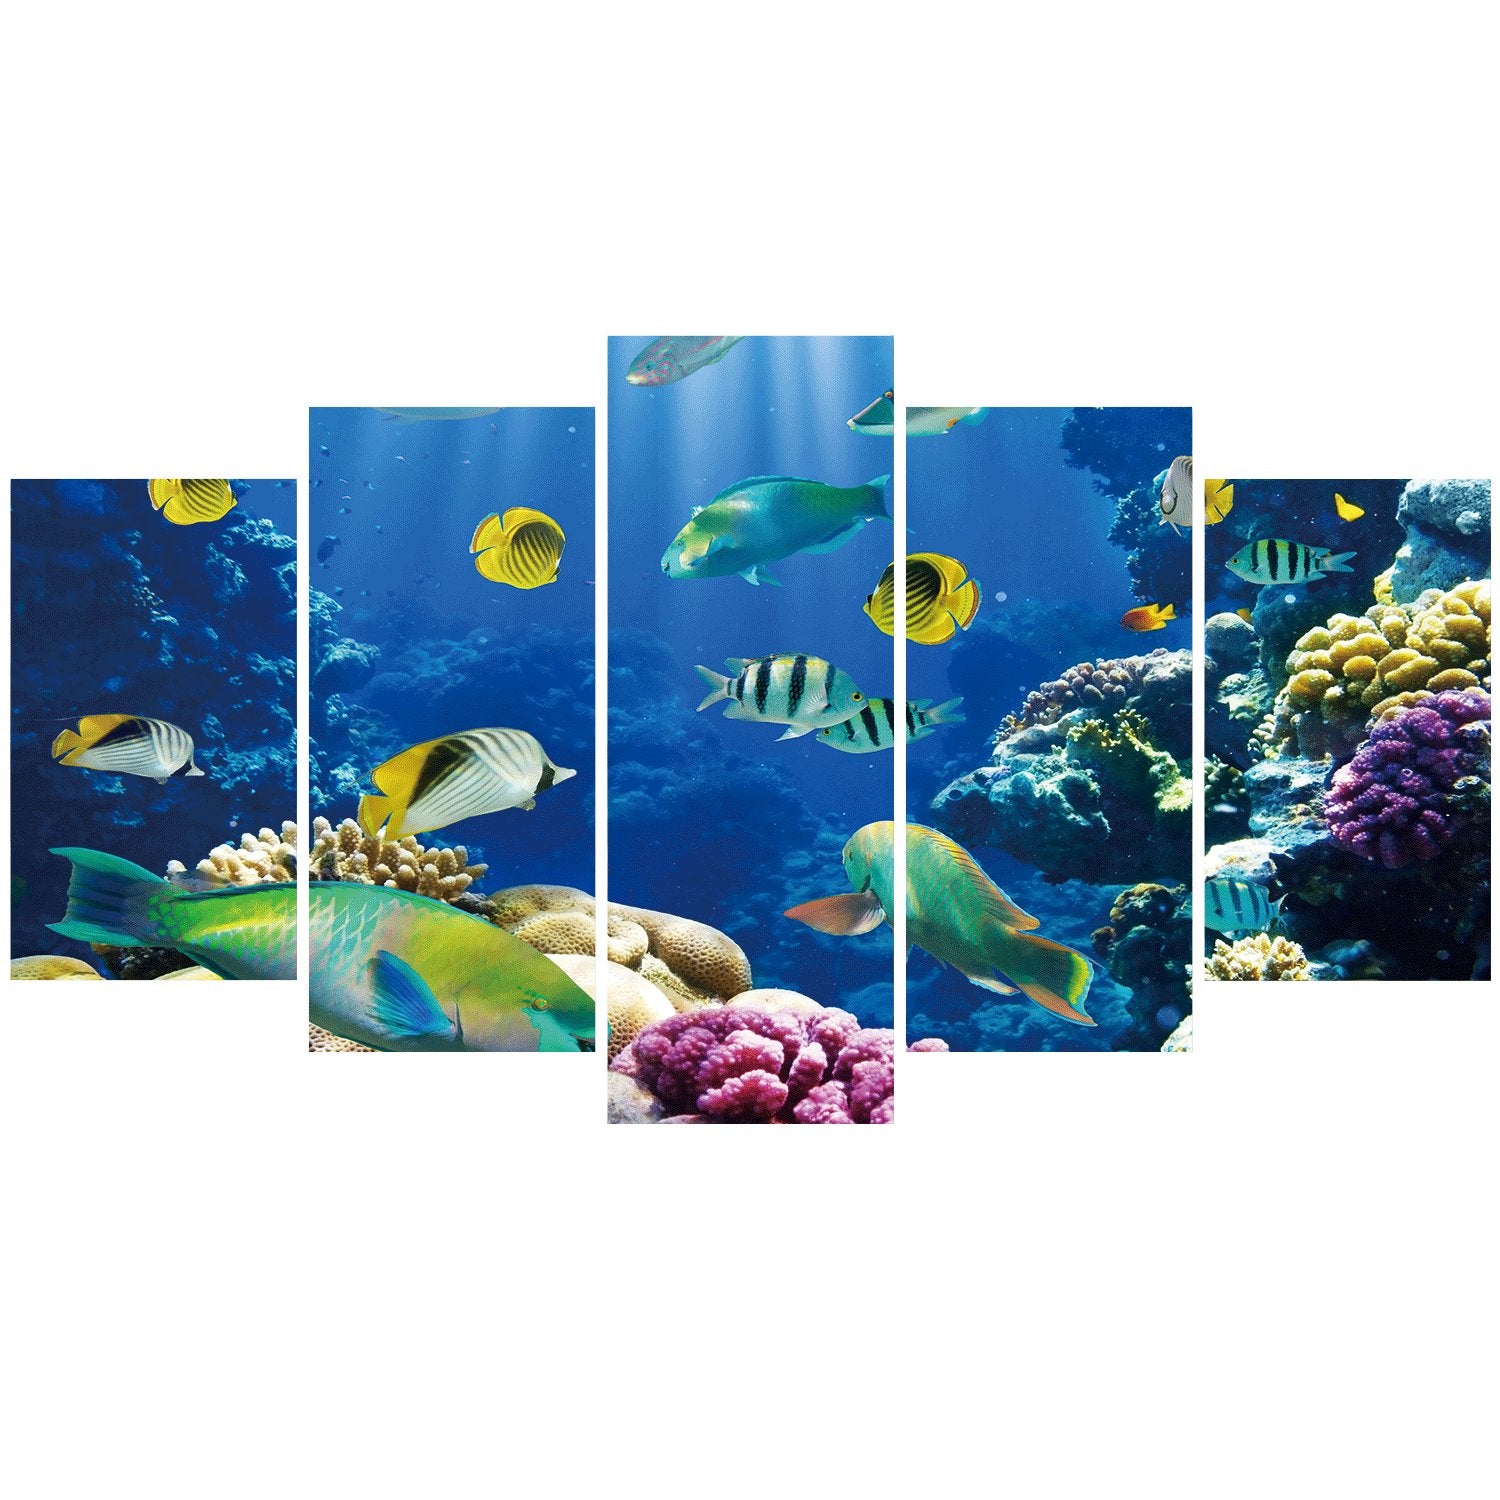 Going Underwater 5 Piece Canvas Wall Art – Vigor and Whim